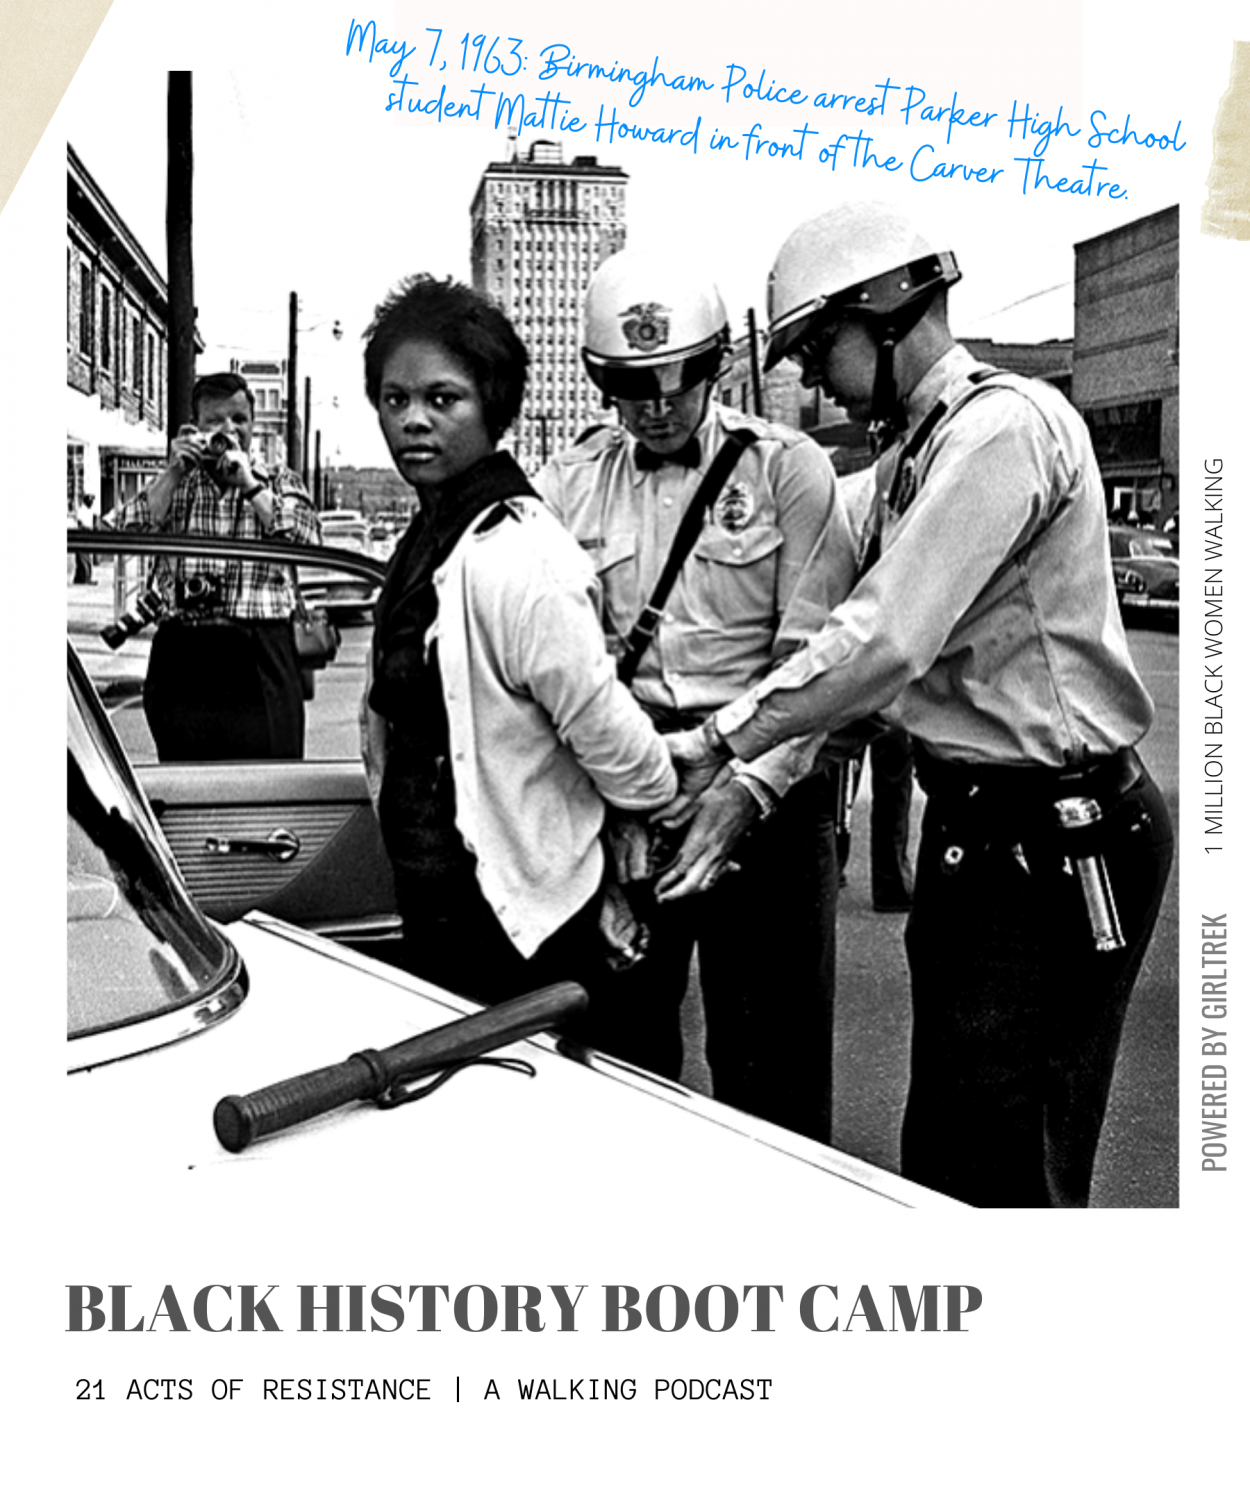 Black History Boot Camp: A walking podcast